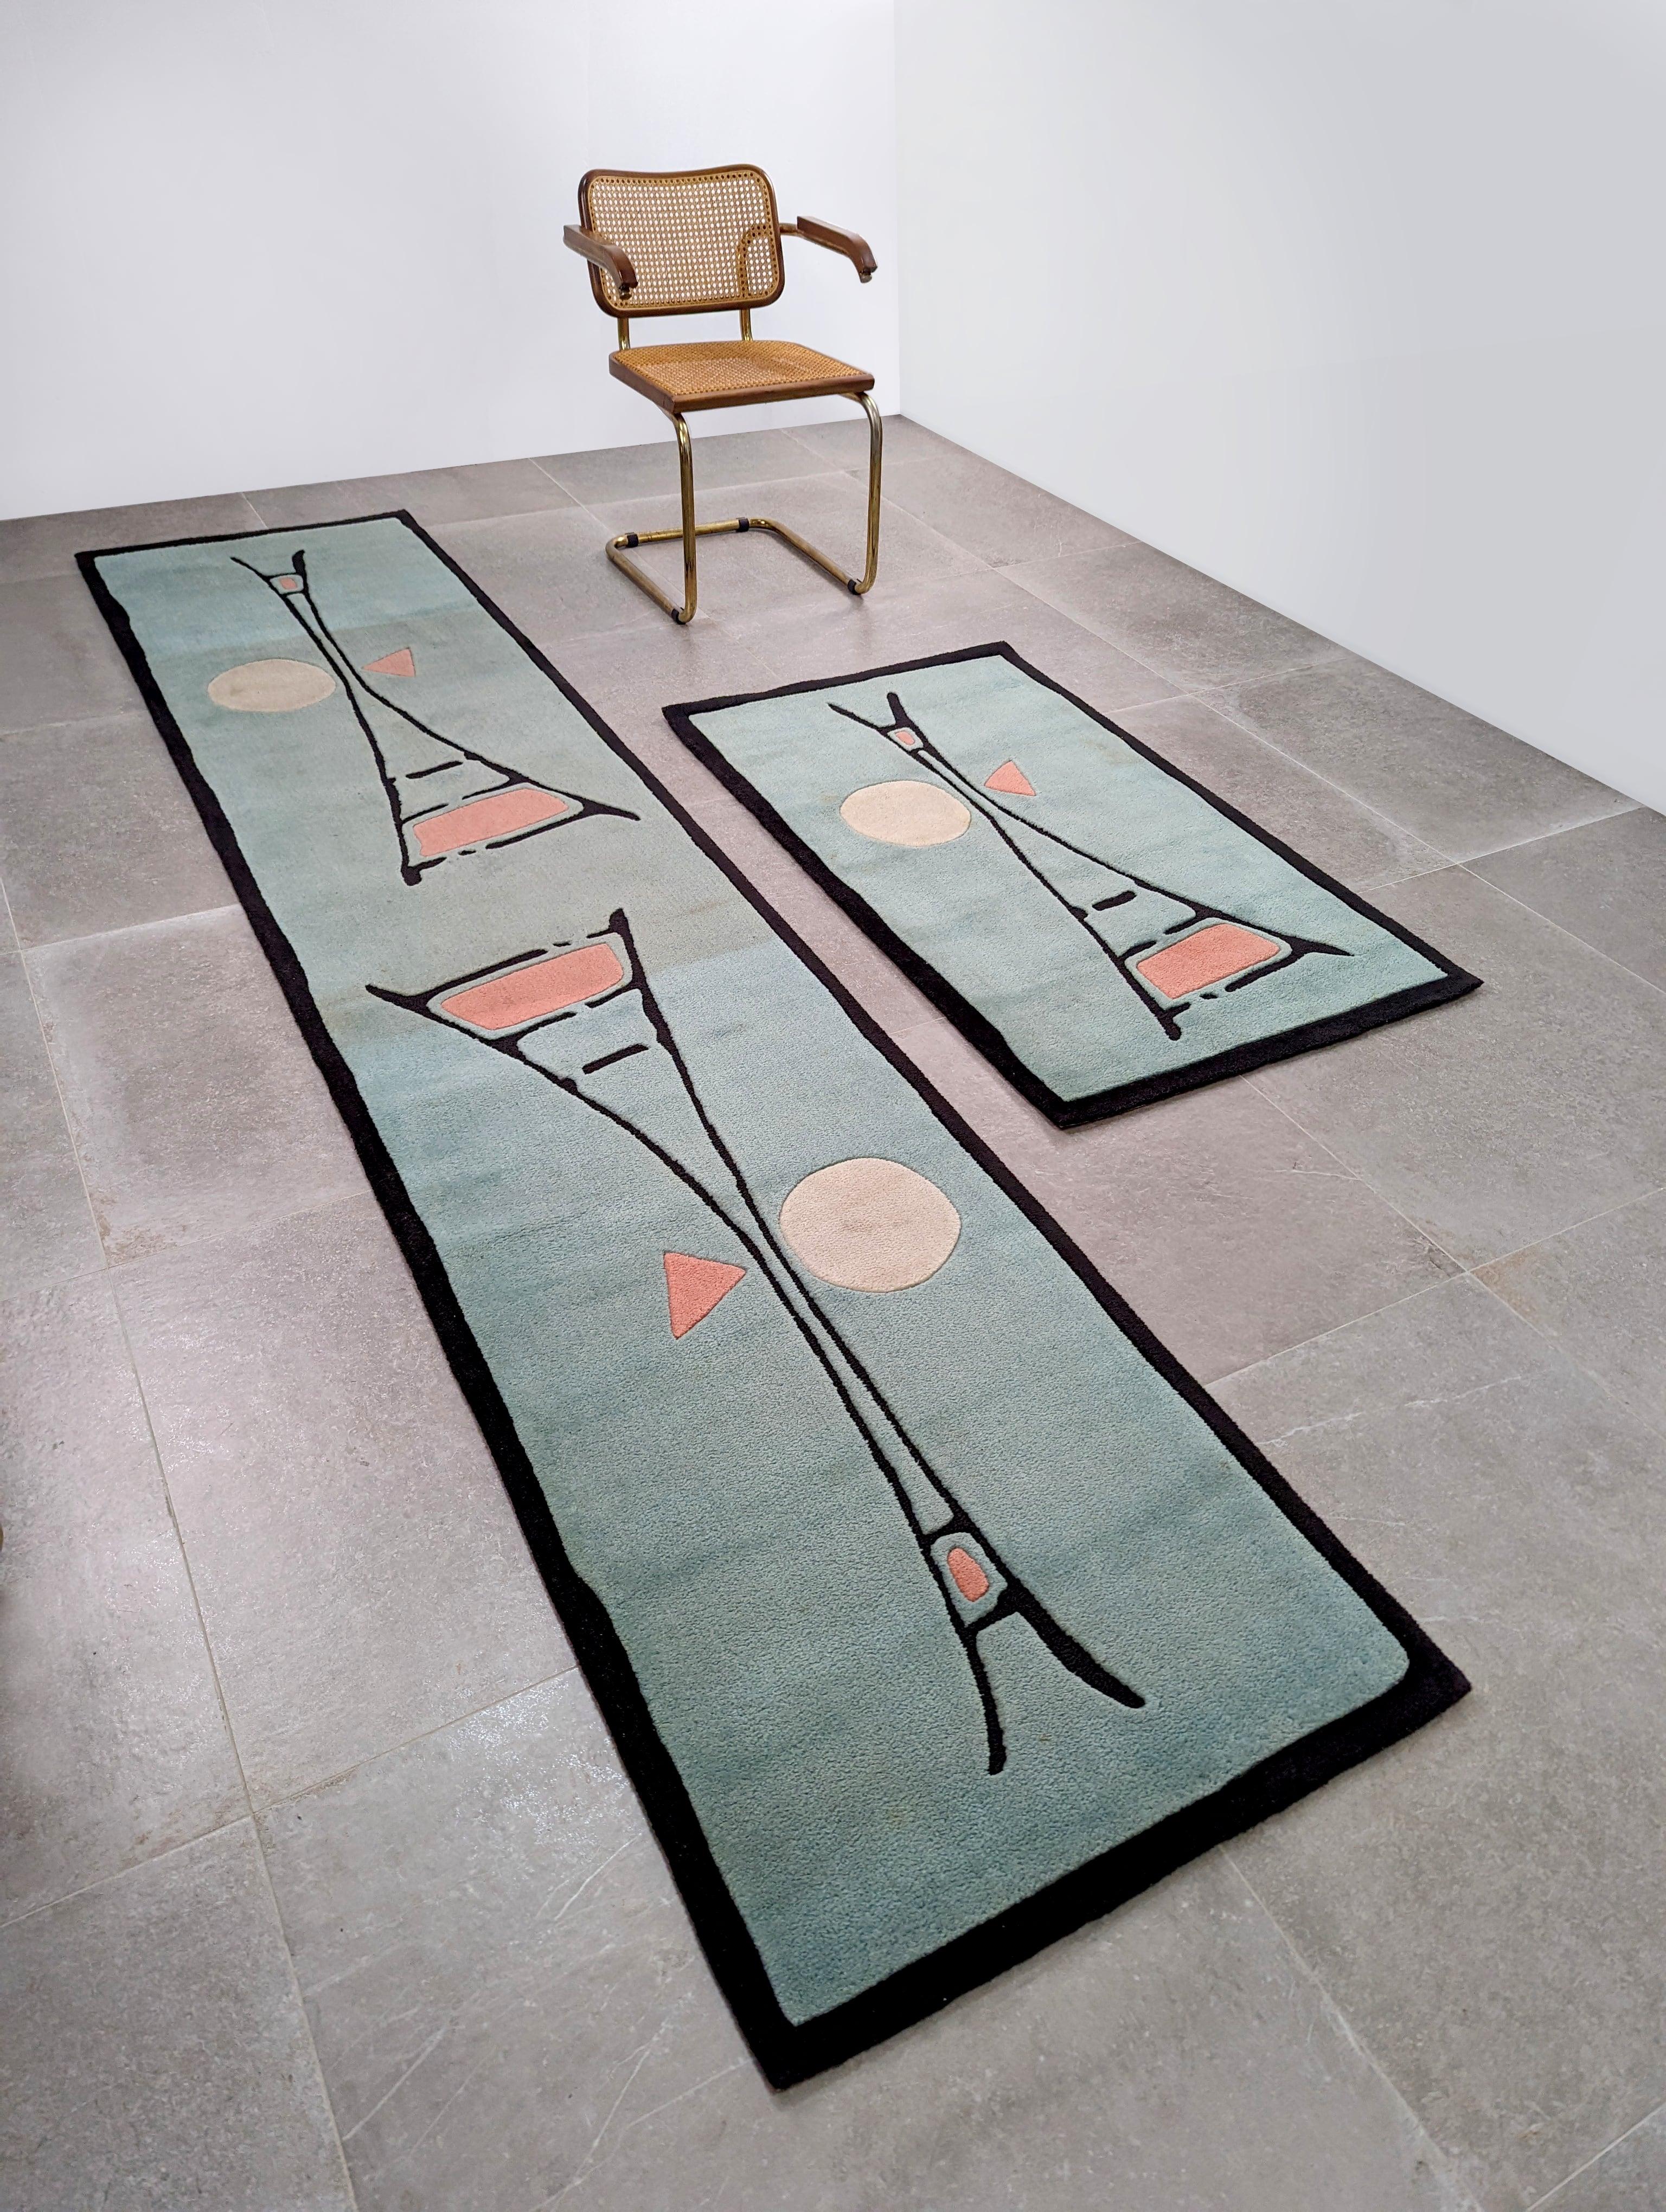 Pair of rugs designed by textile artist John Günter for JAB made in Pura La Virgen limited edition 10/8.

Dimensions: 350 cm x 75 cm and 140 cm x 80 cm